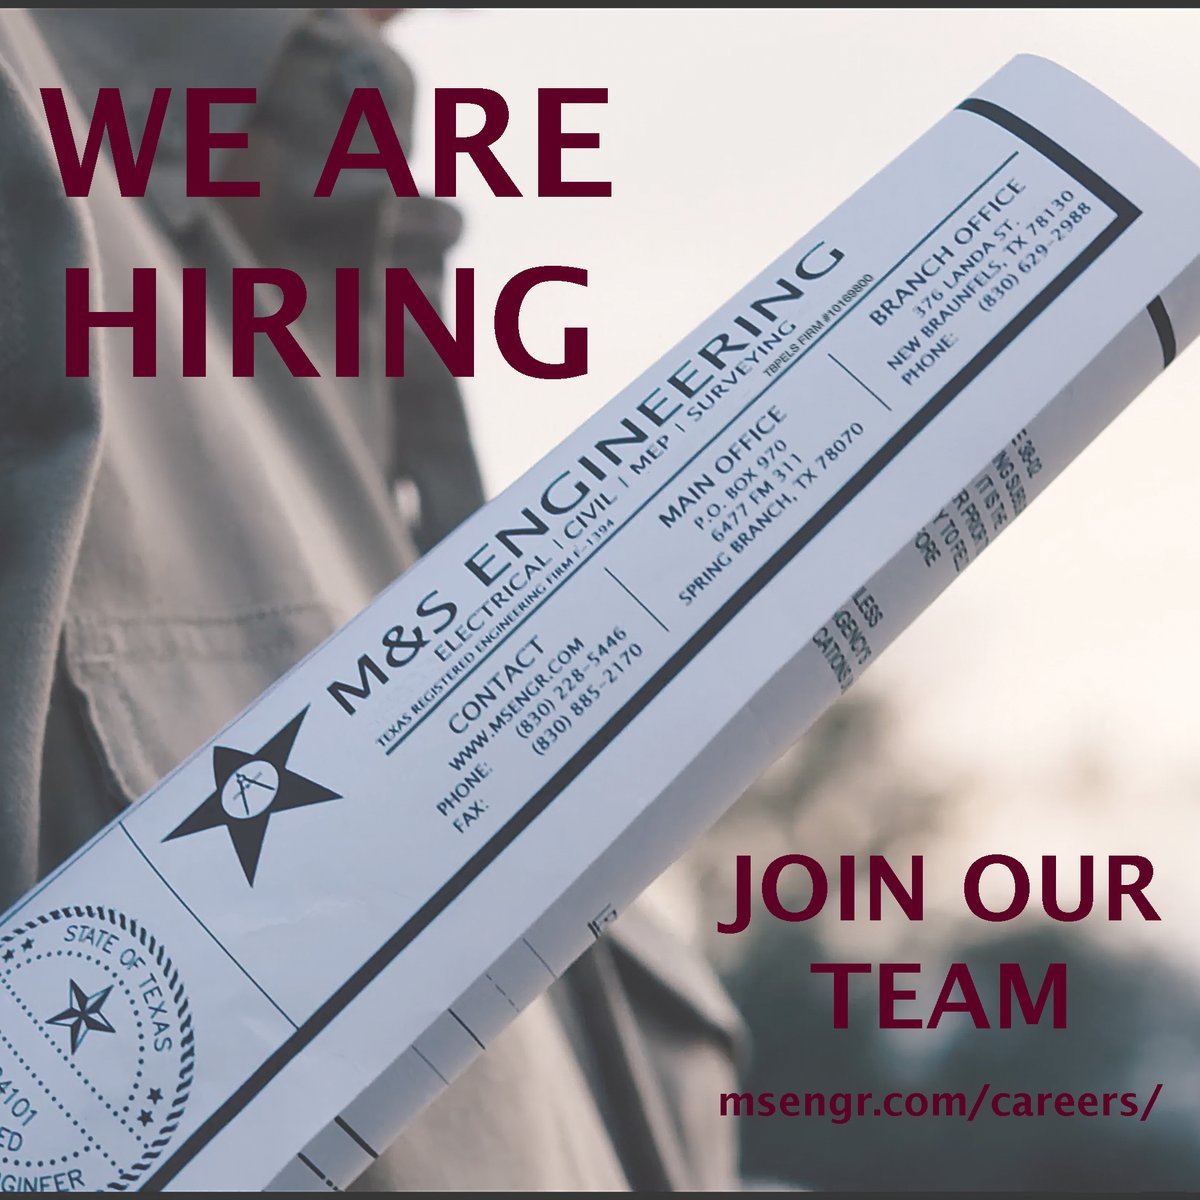 Join our team! We're looking to fill open positions. Apply today at msengr.com/careers/
#hiring #engineeringcareers #civilengineering #electricalengineering #civilengineer #electricalengineer